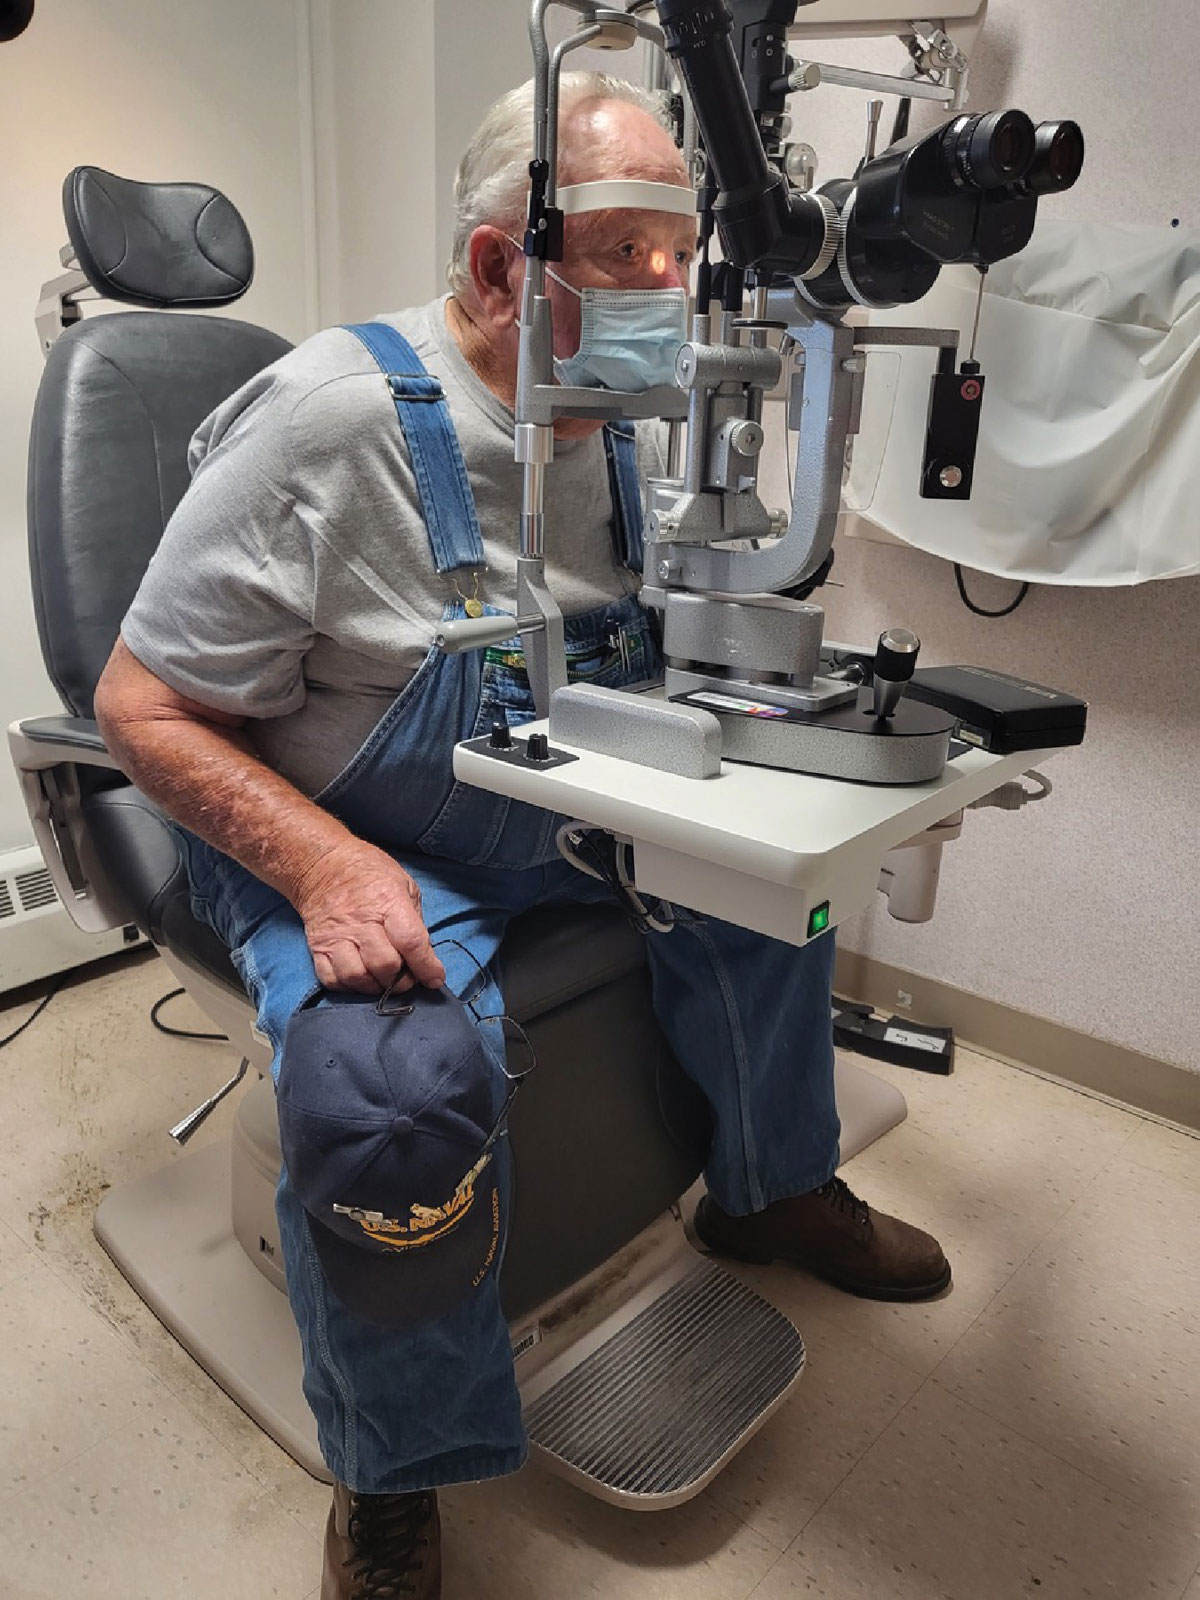 Fig. 1. Ask your patient to spread their legs apart and bend forward at their hips for a more comfortable fit into the slit lamp.